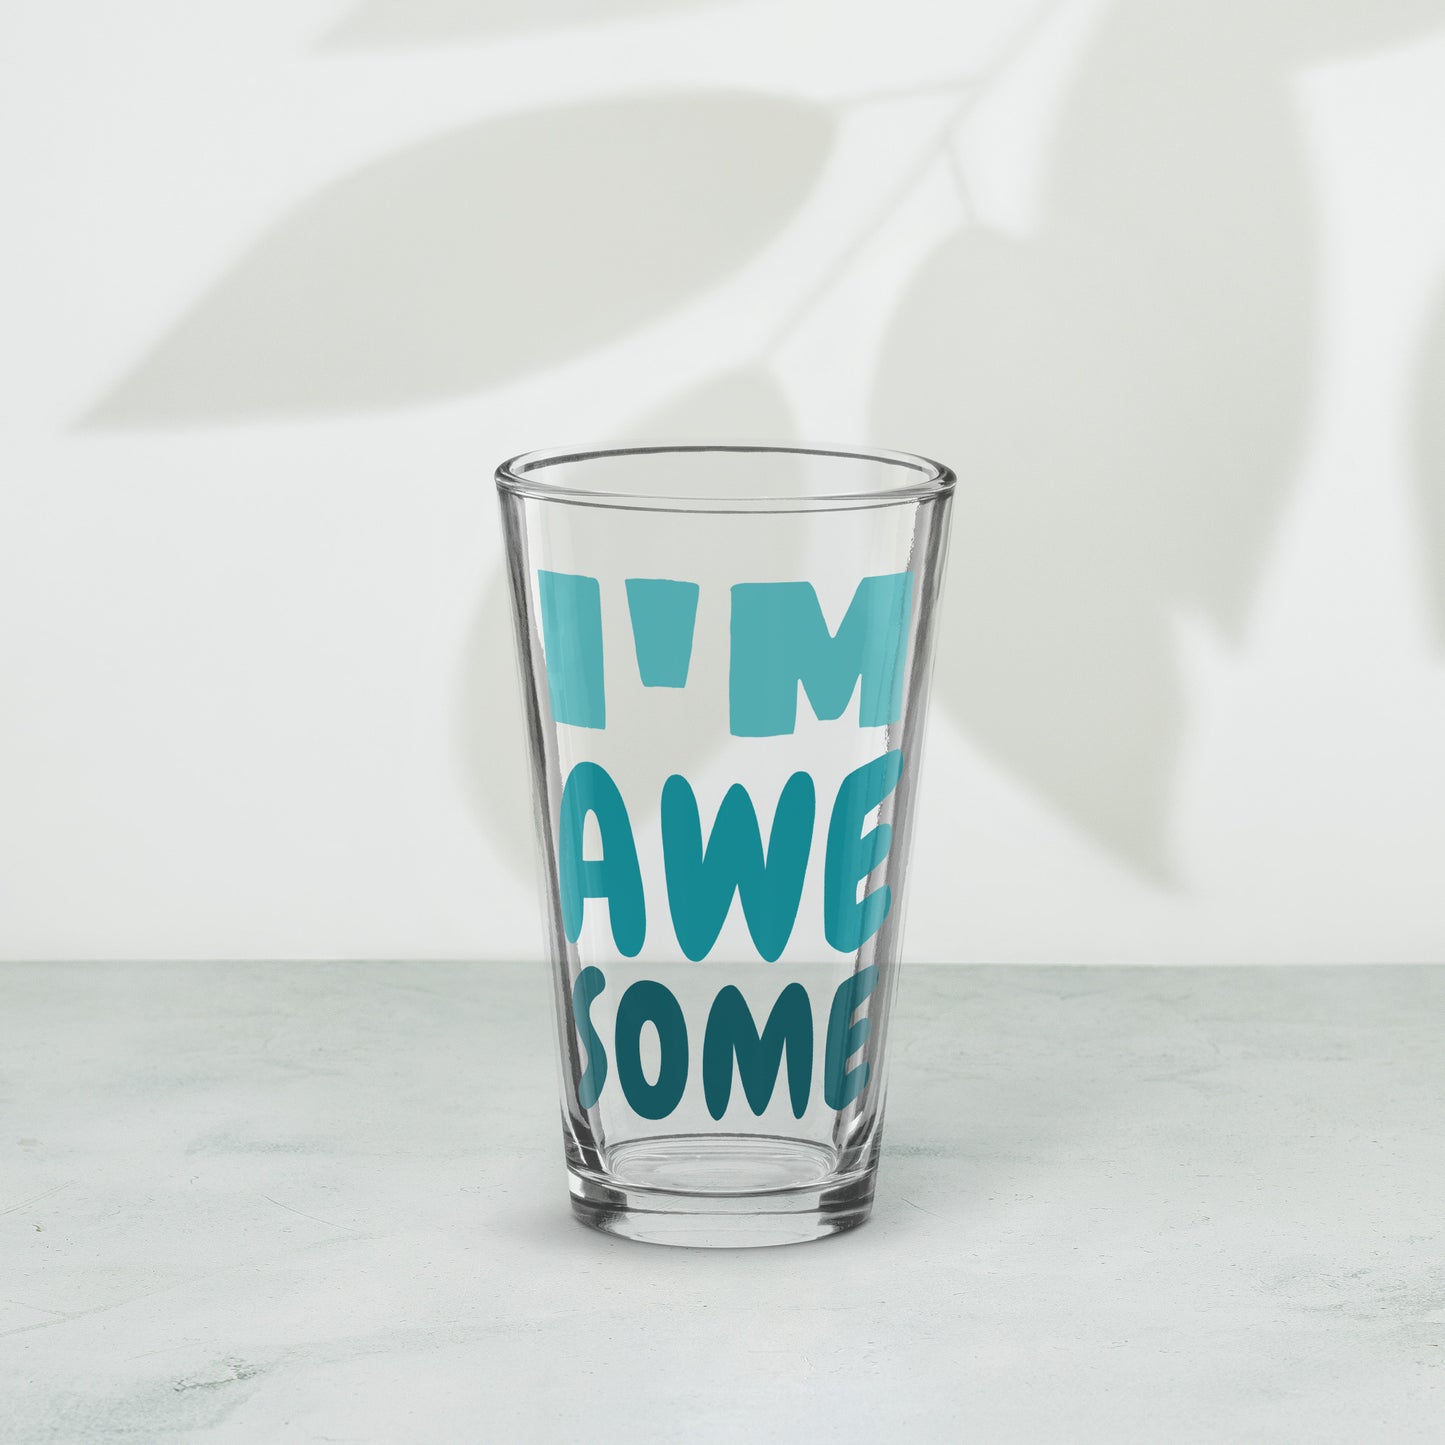 Shaker Pint Glass: I'm Awesome (teal colors)